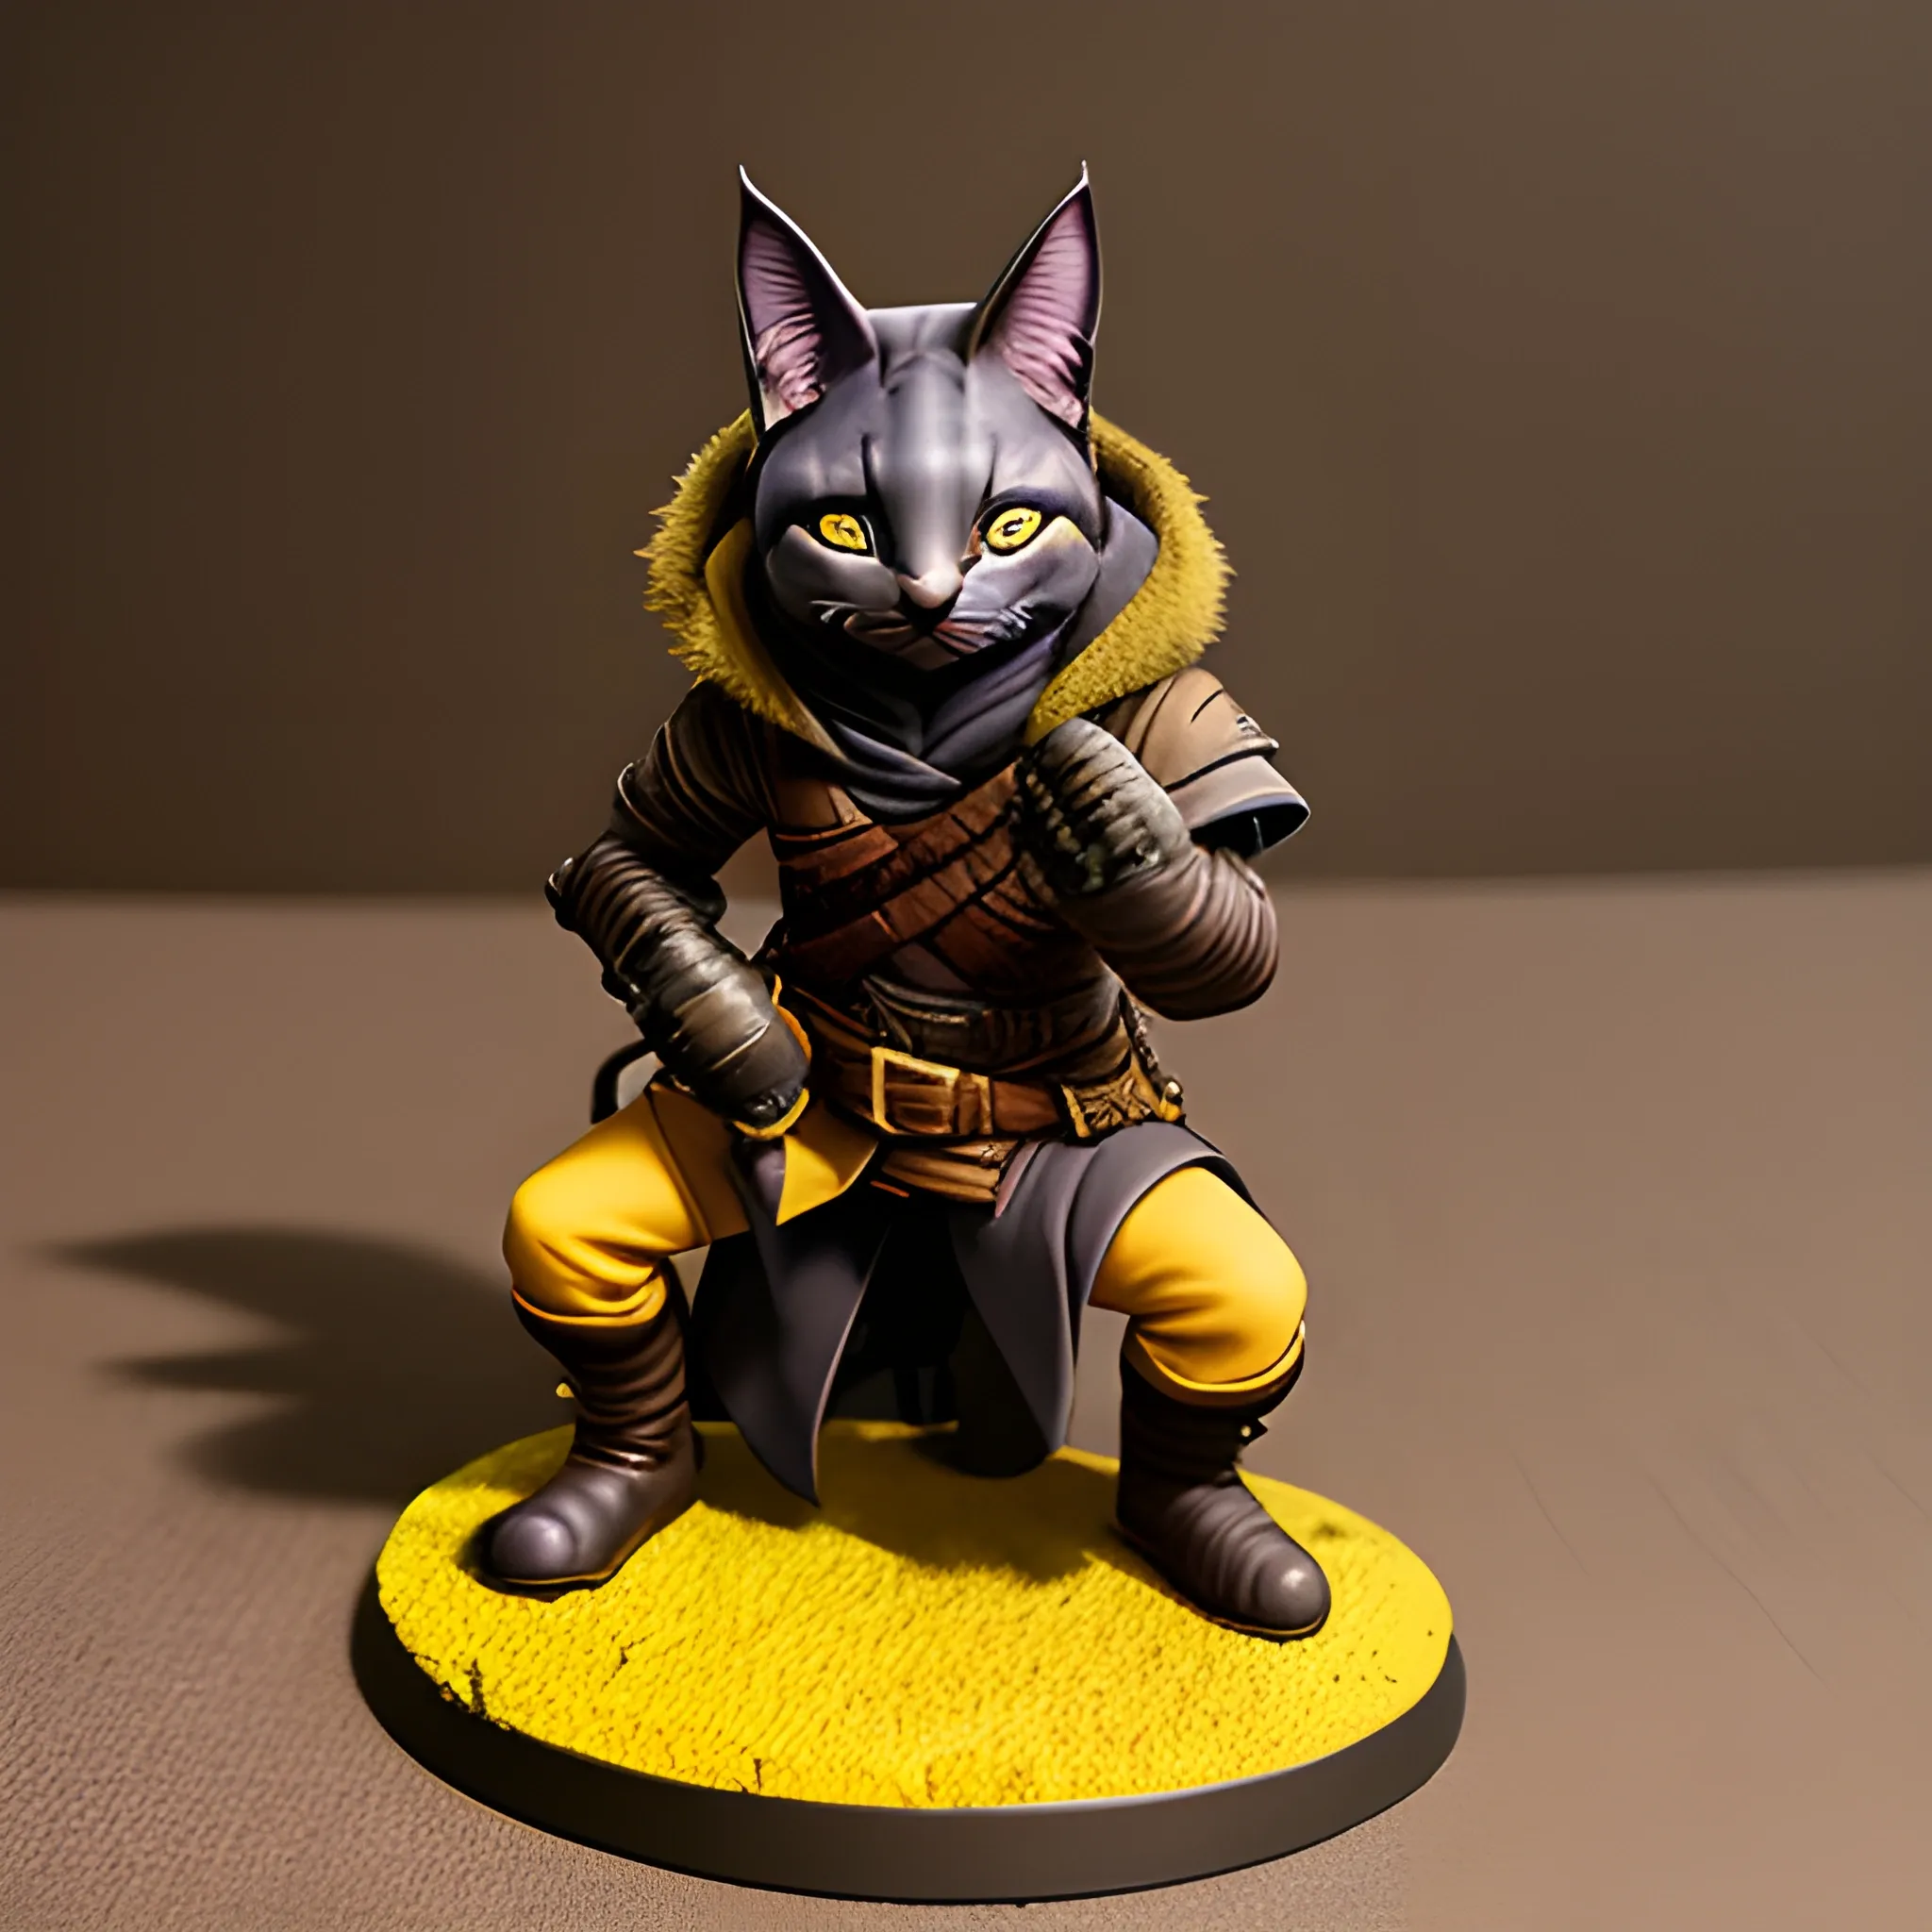 dnd tabaxi rogue with dark fur and yellow eyes, hooded with leather armour crouching down